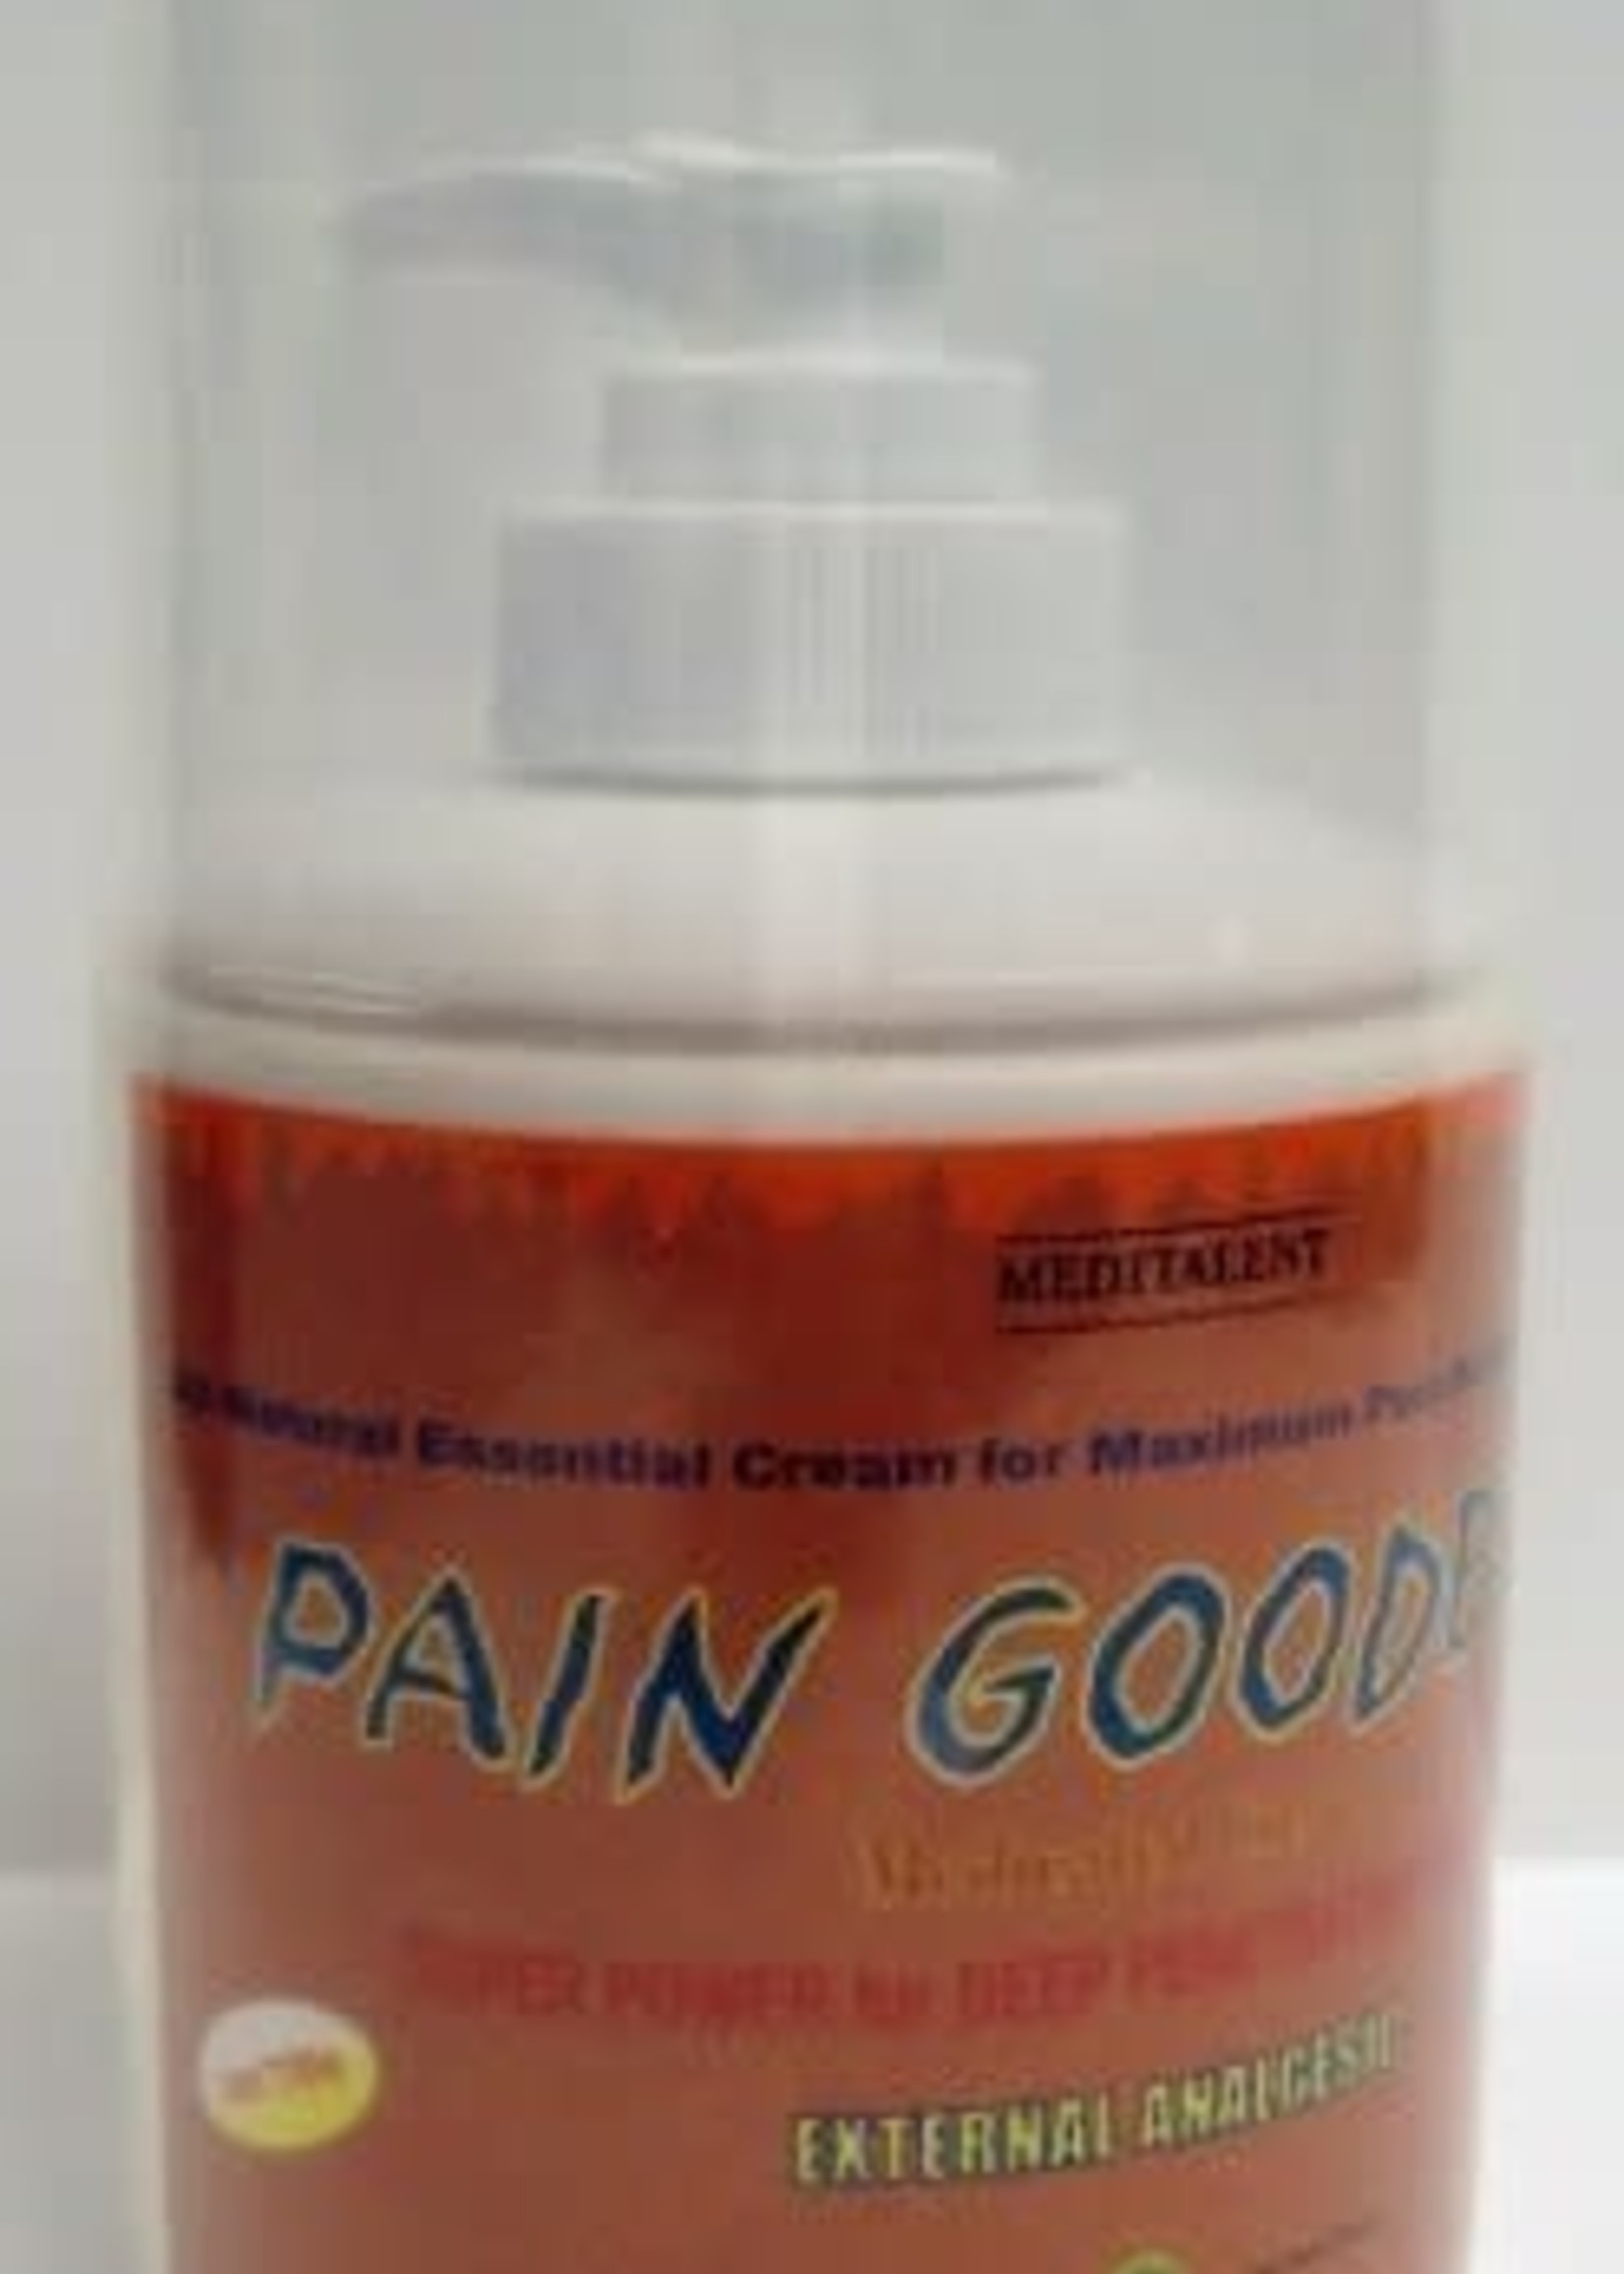 Pain Goodbye Medicated Cream by Meditalent(Hot Type)